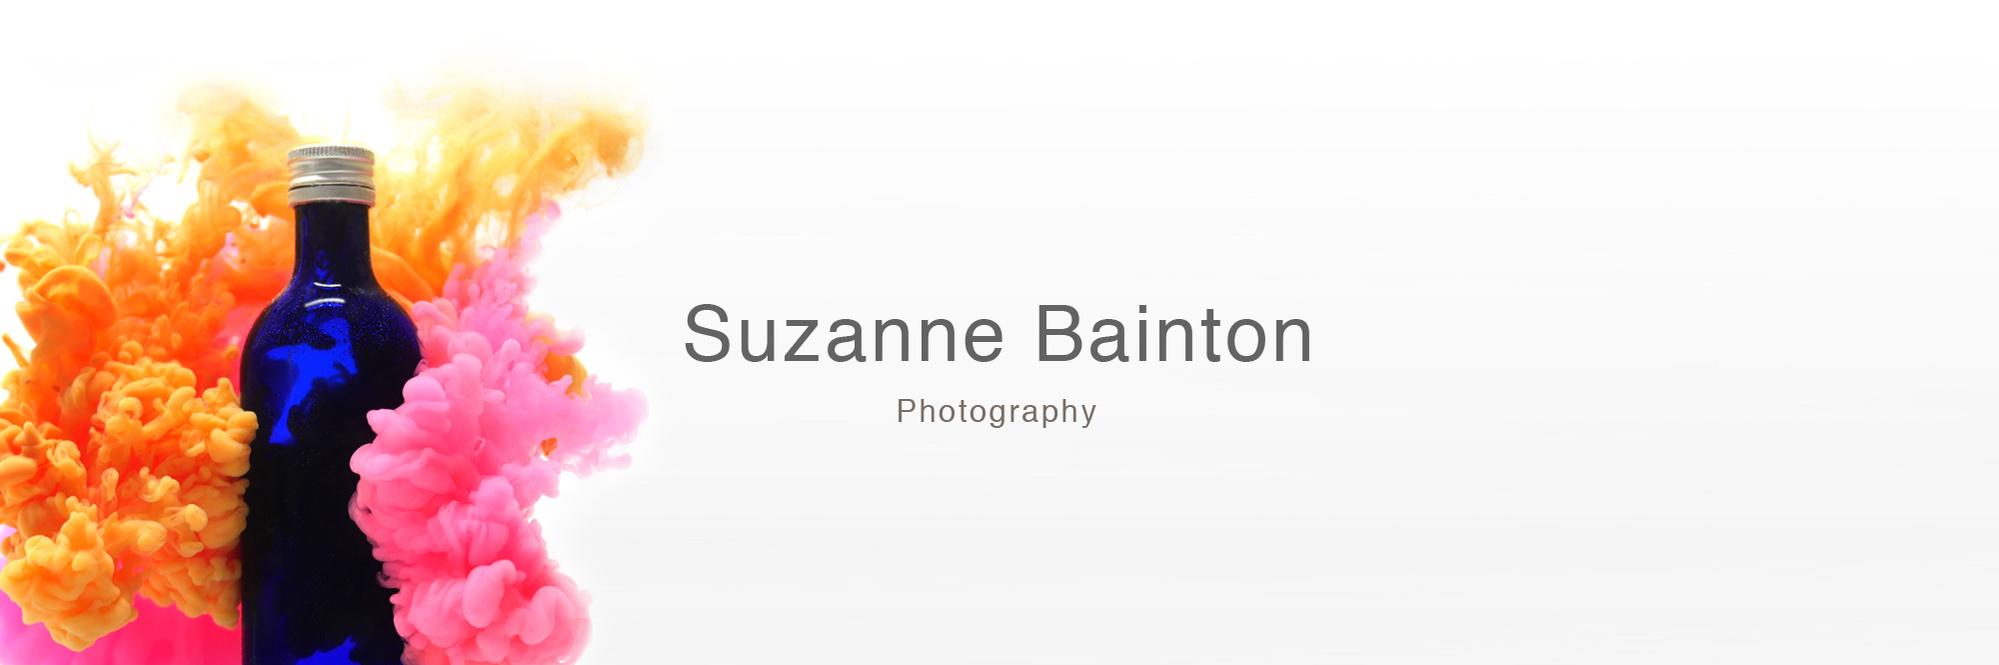 Suzanne Bainton photographer, Tunbridge Wells, Kent. I work with small businesses to help boost their brand or services through captivating photography. 